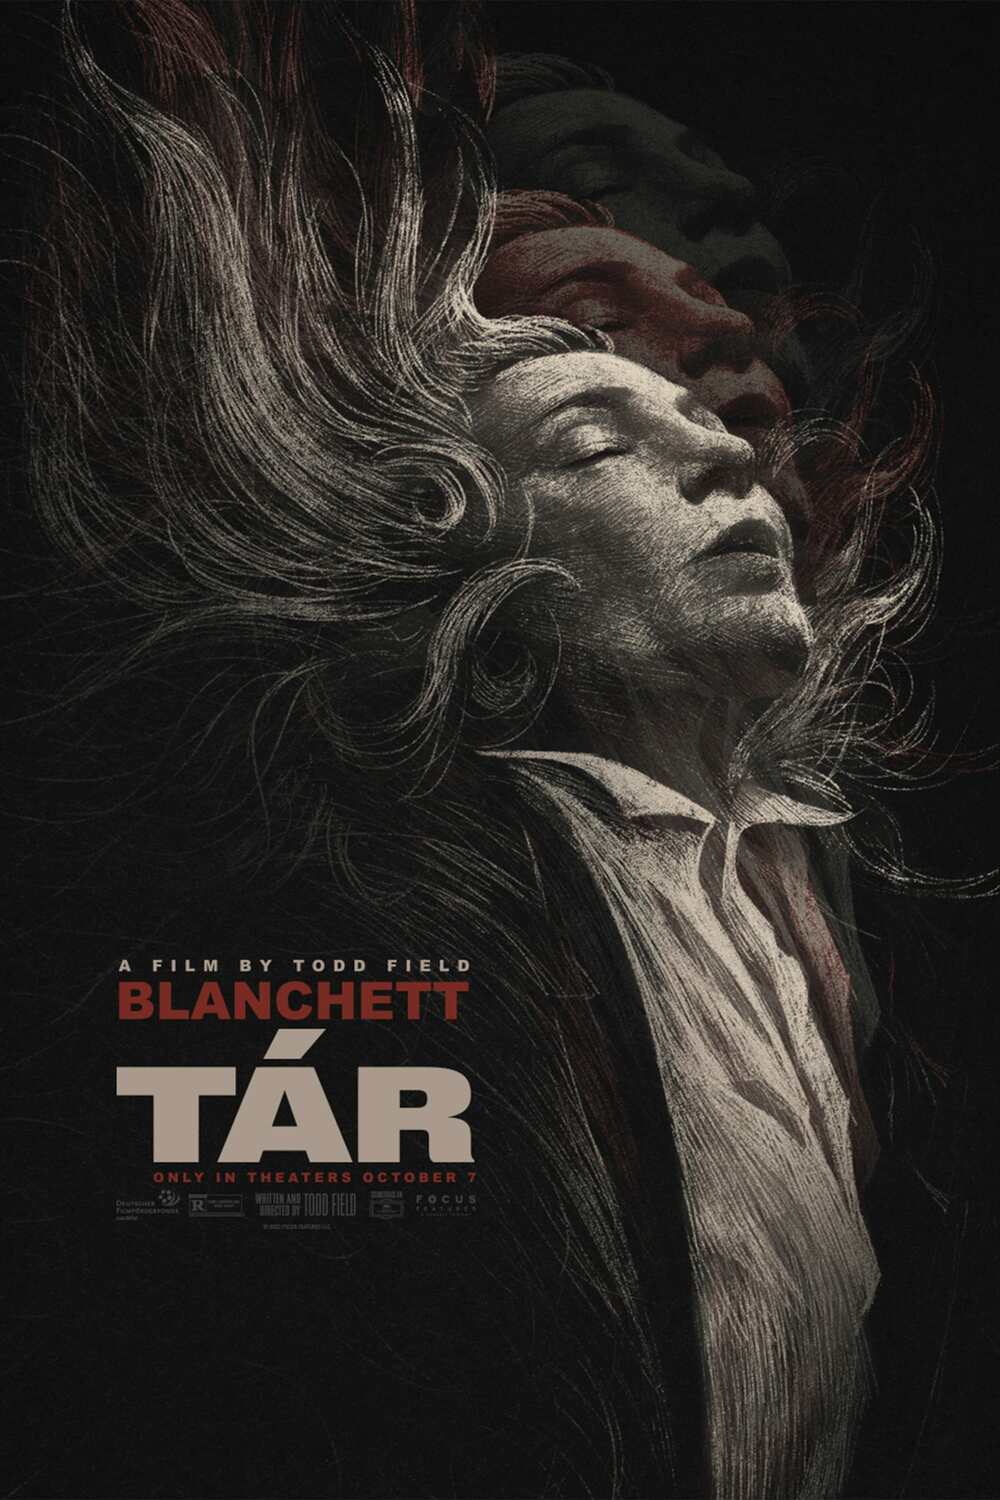 movie review of tar